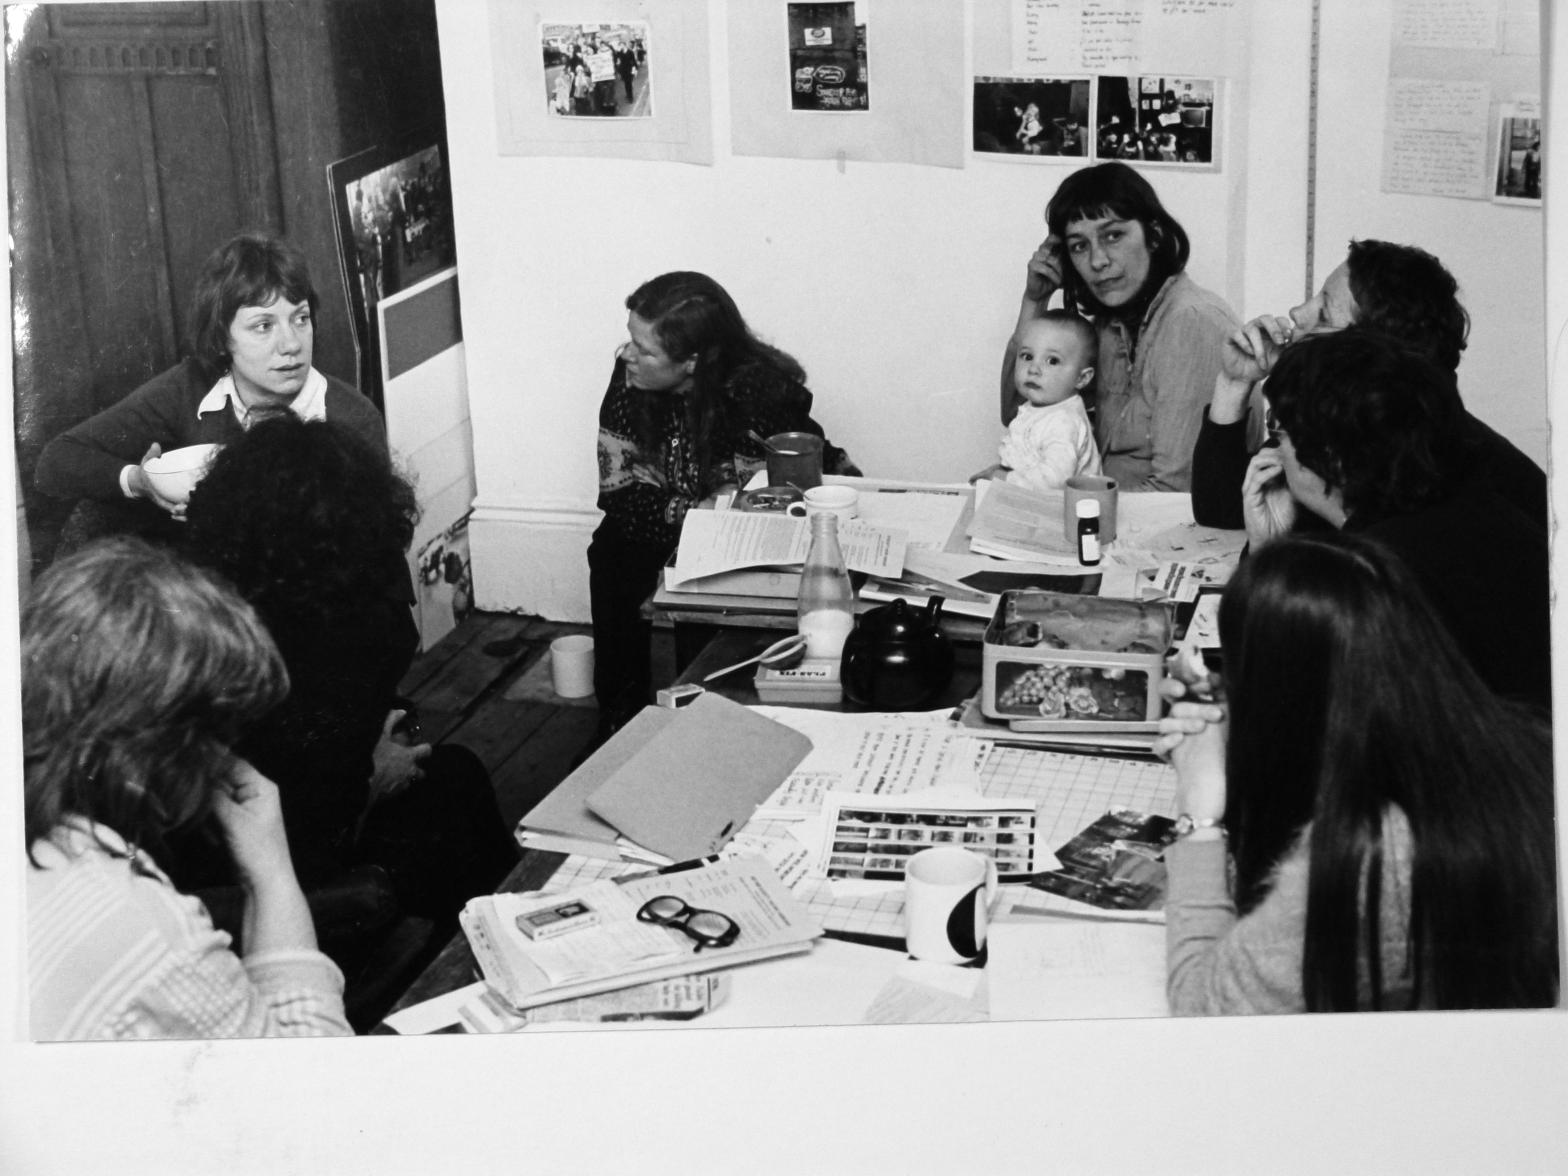 A meeting of Hackney Flashers members in a members home in the 1970s ©Hackney Flashers